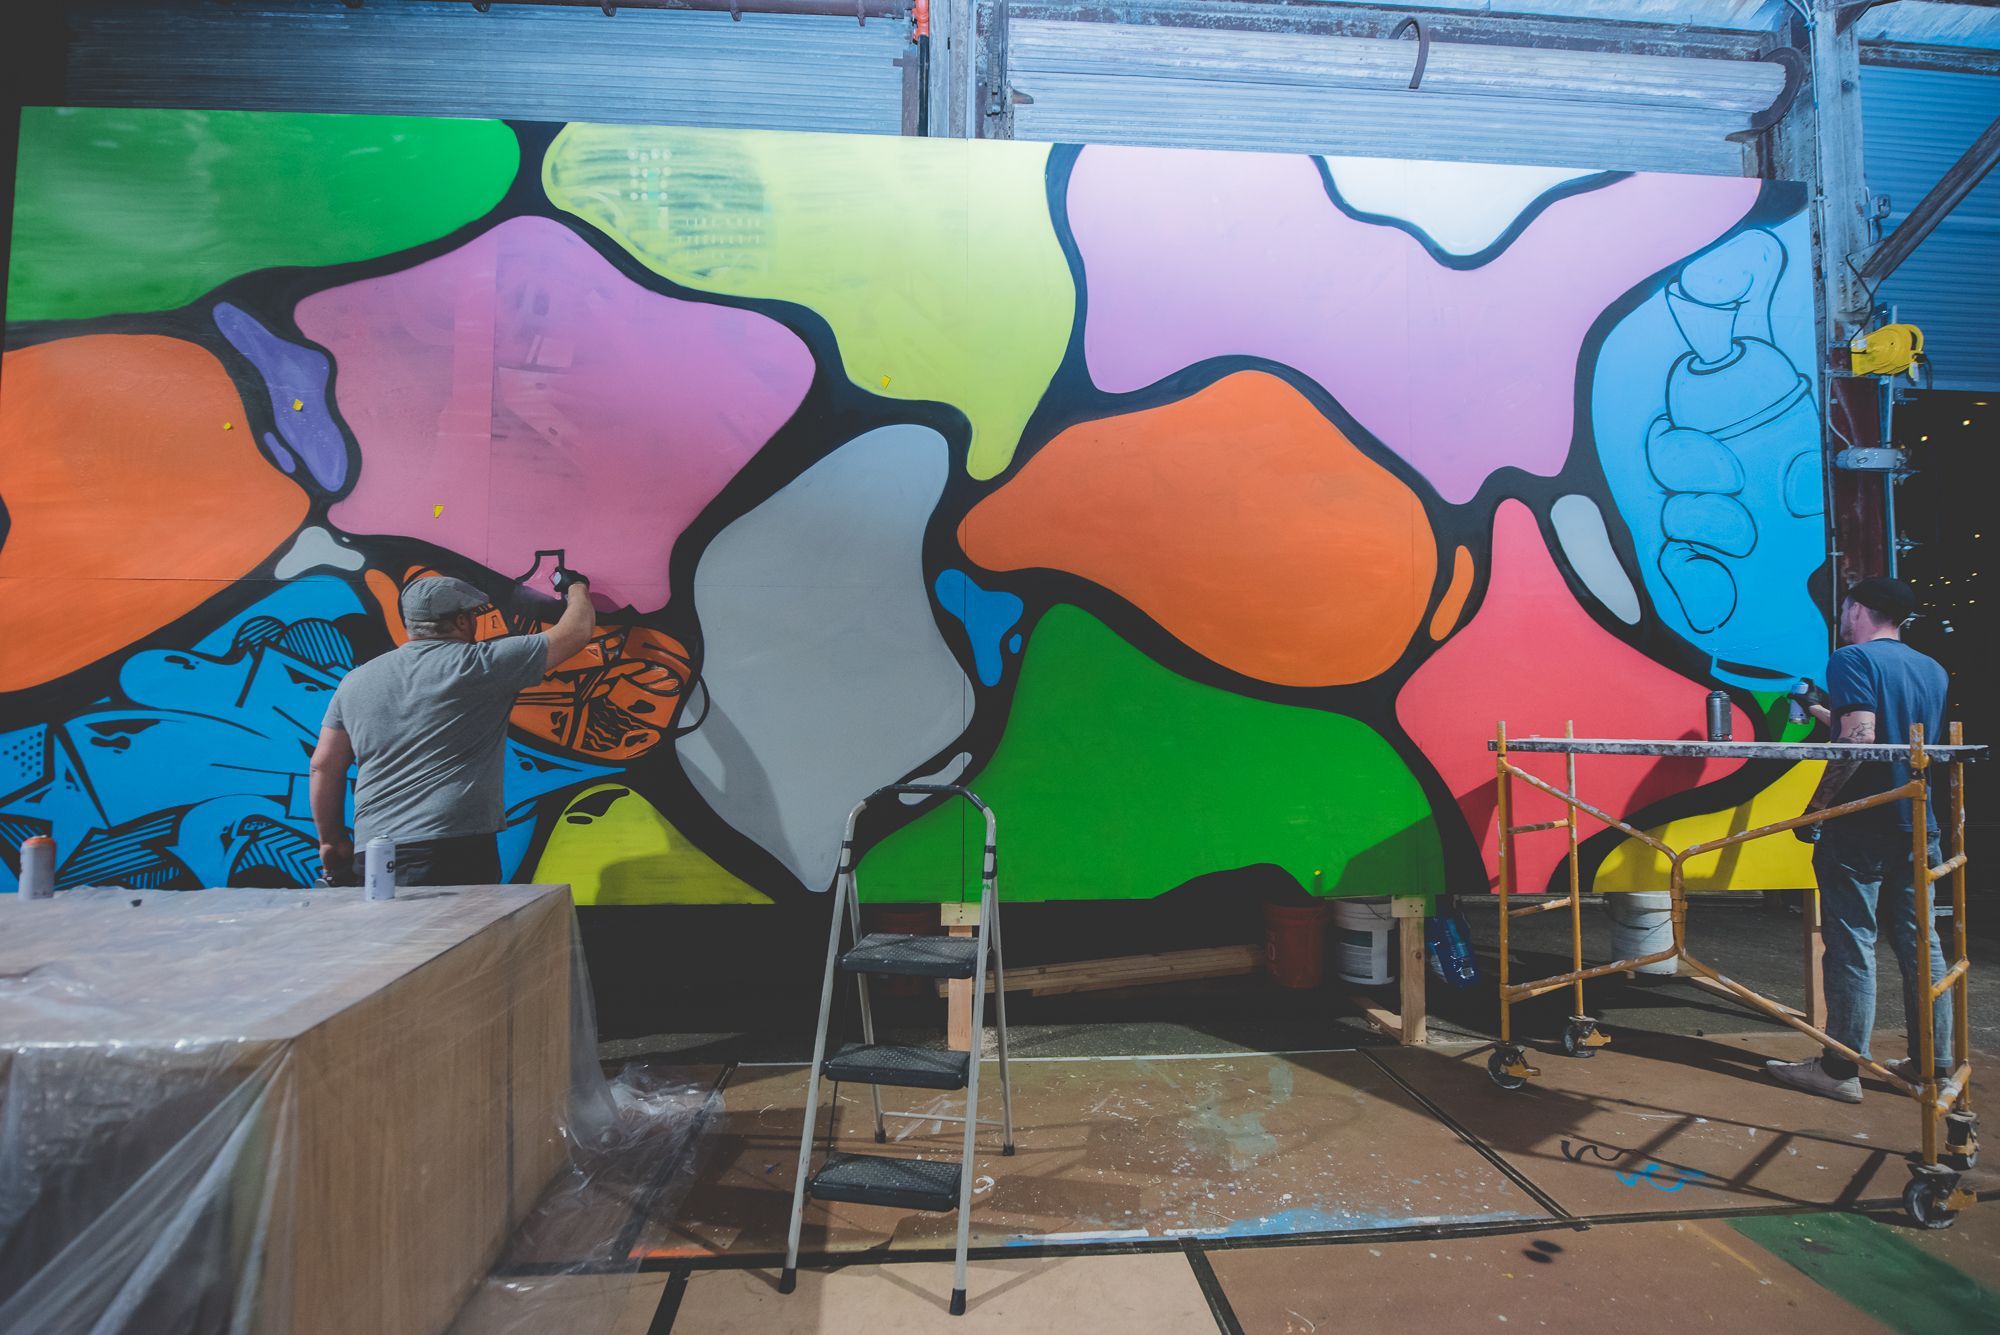 Artists paint a colorful mural on plywood.